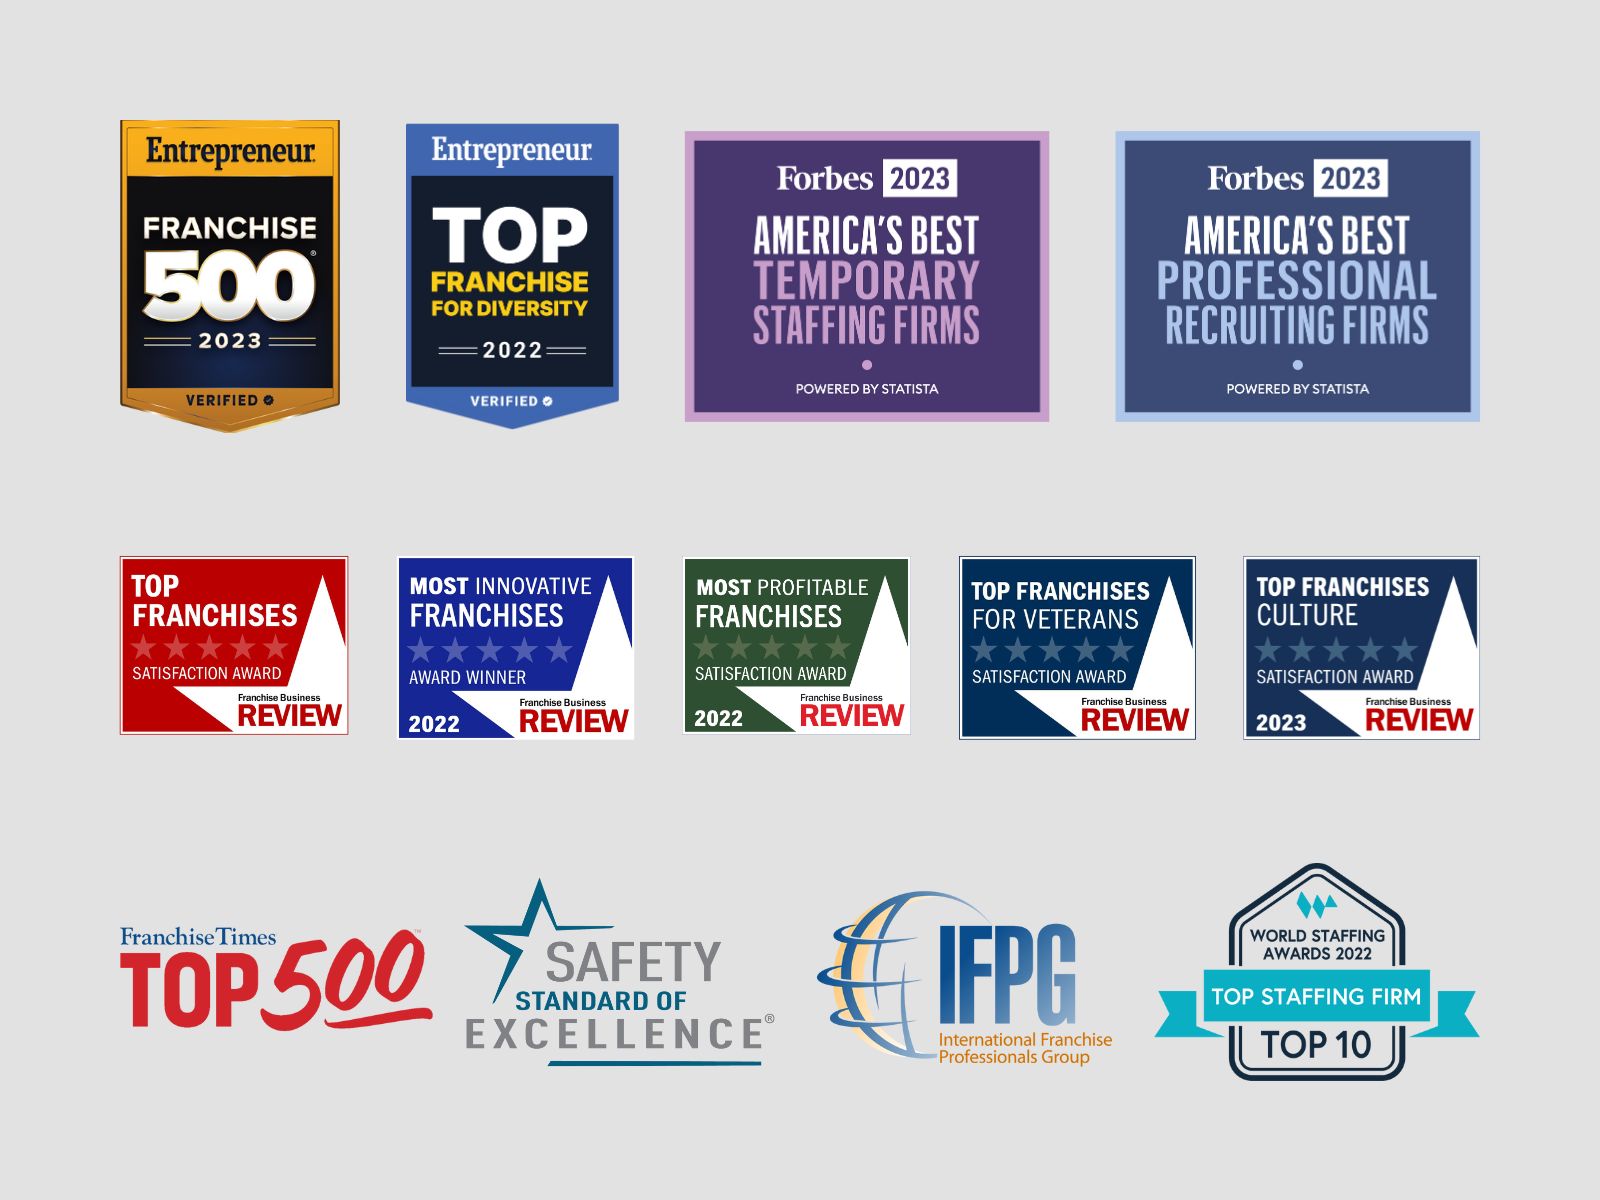 Spherion has earned numerous industry awards for excellence in staffing and customer service.